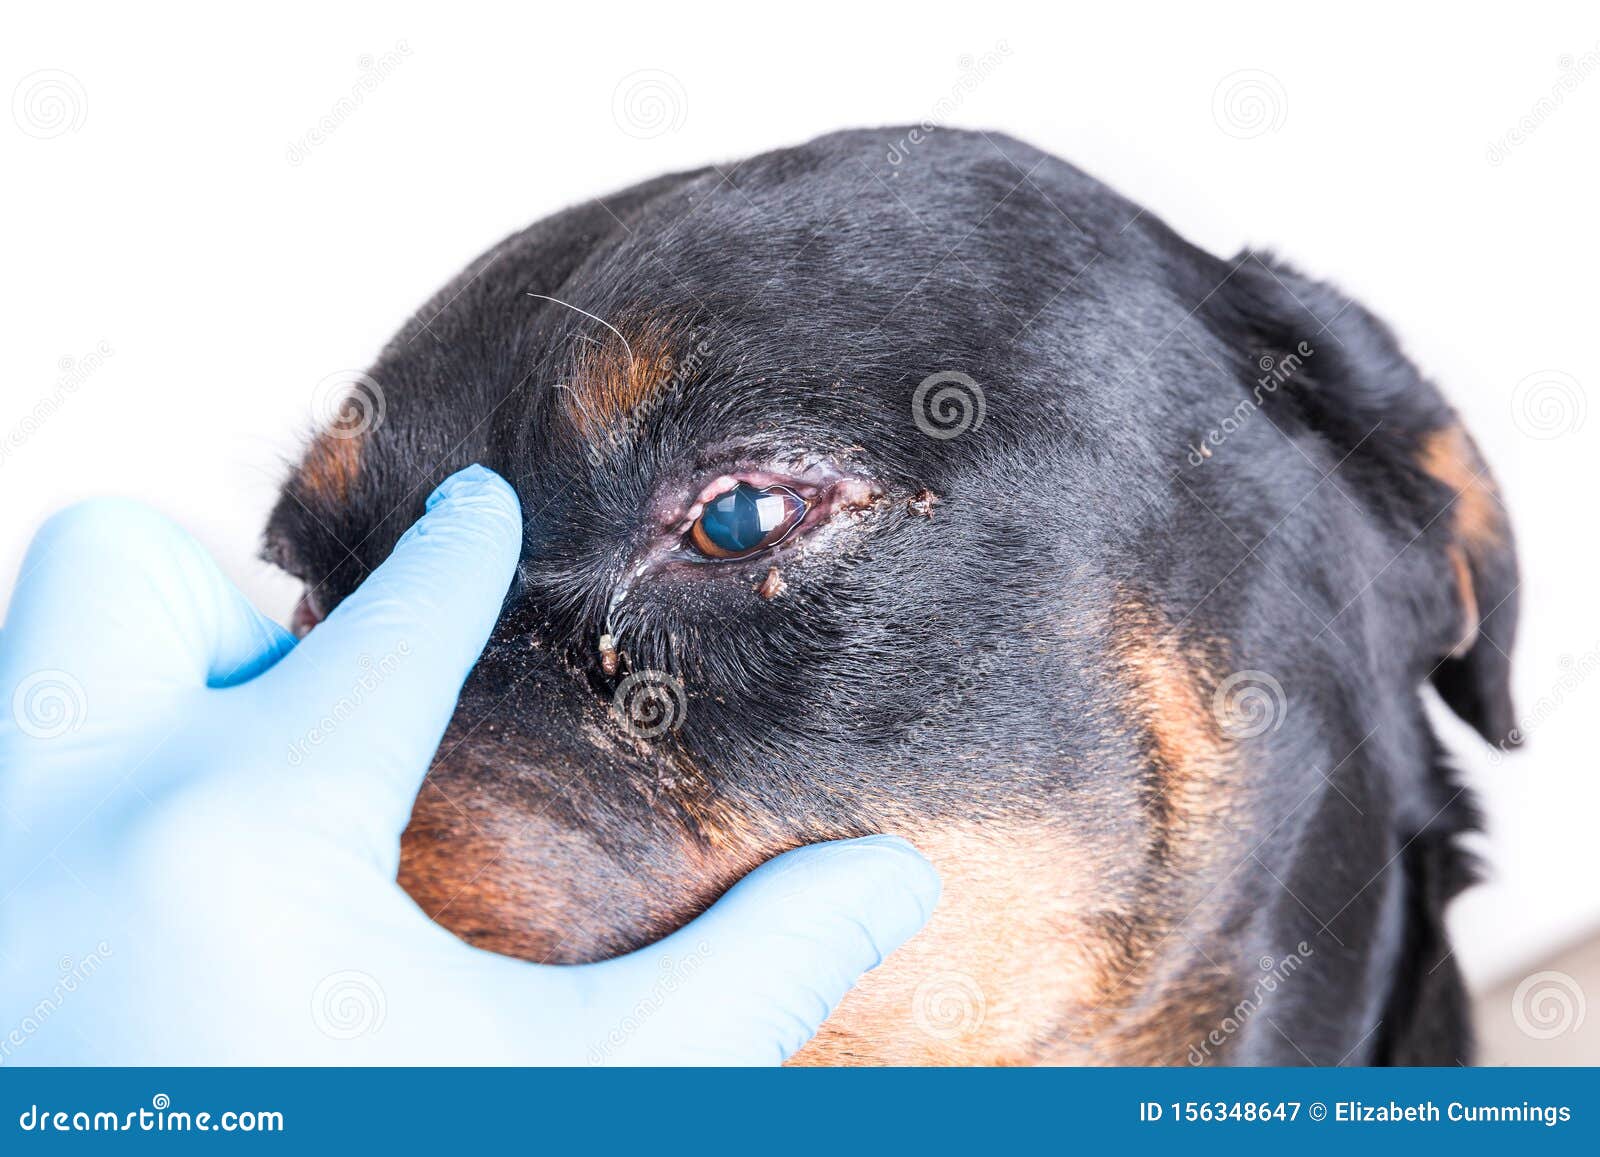 Sick Unhappy Dog with Swollen Red Eyes Stock Image Image of discharge, 156348647